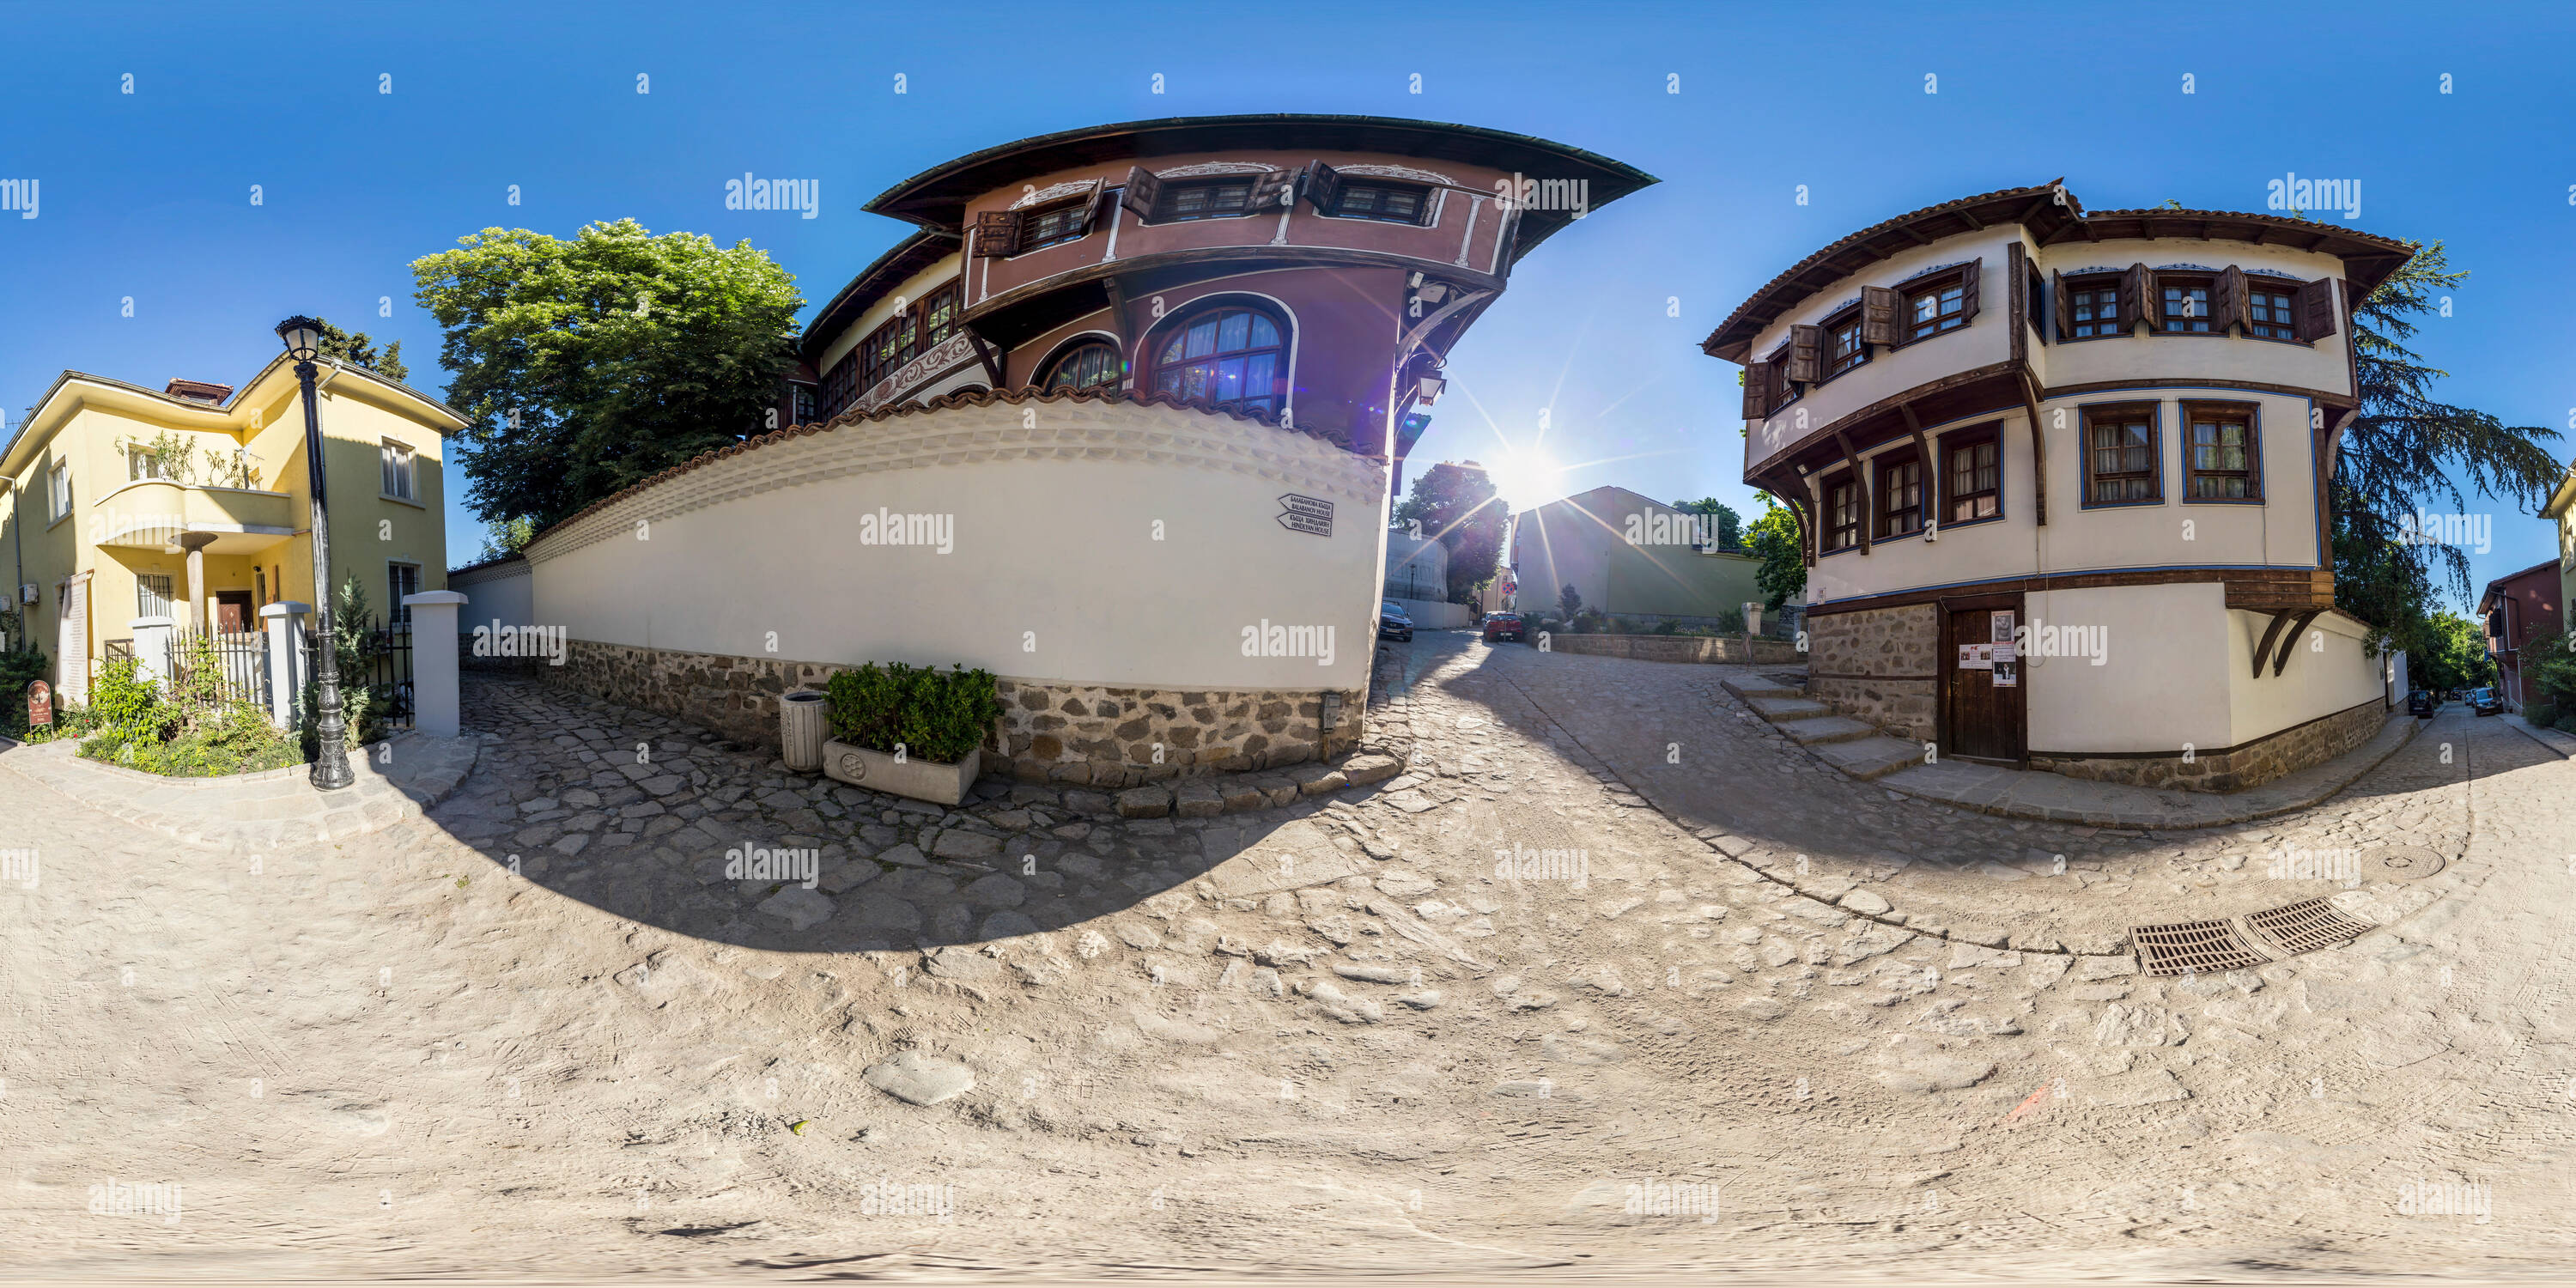 360 degree panoramic view of 380 by 180 degrees spherical panorama of Balabanov's house in the old town of Plovdiv, Bulgaria.